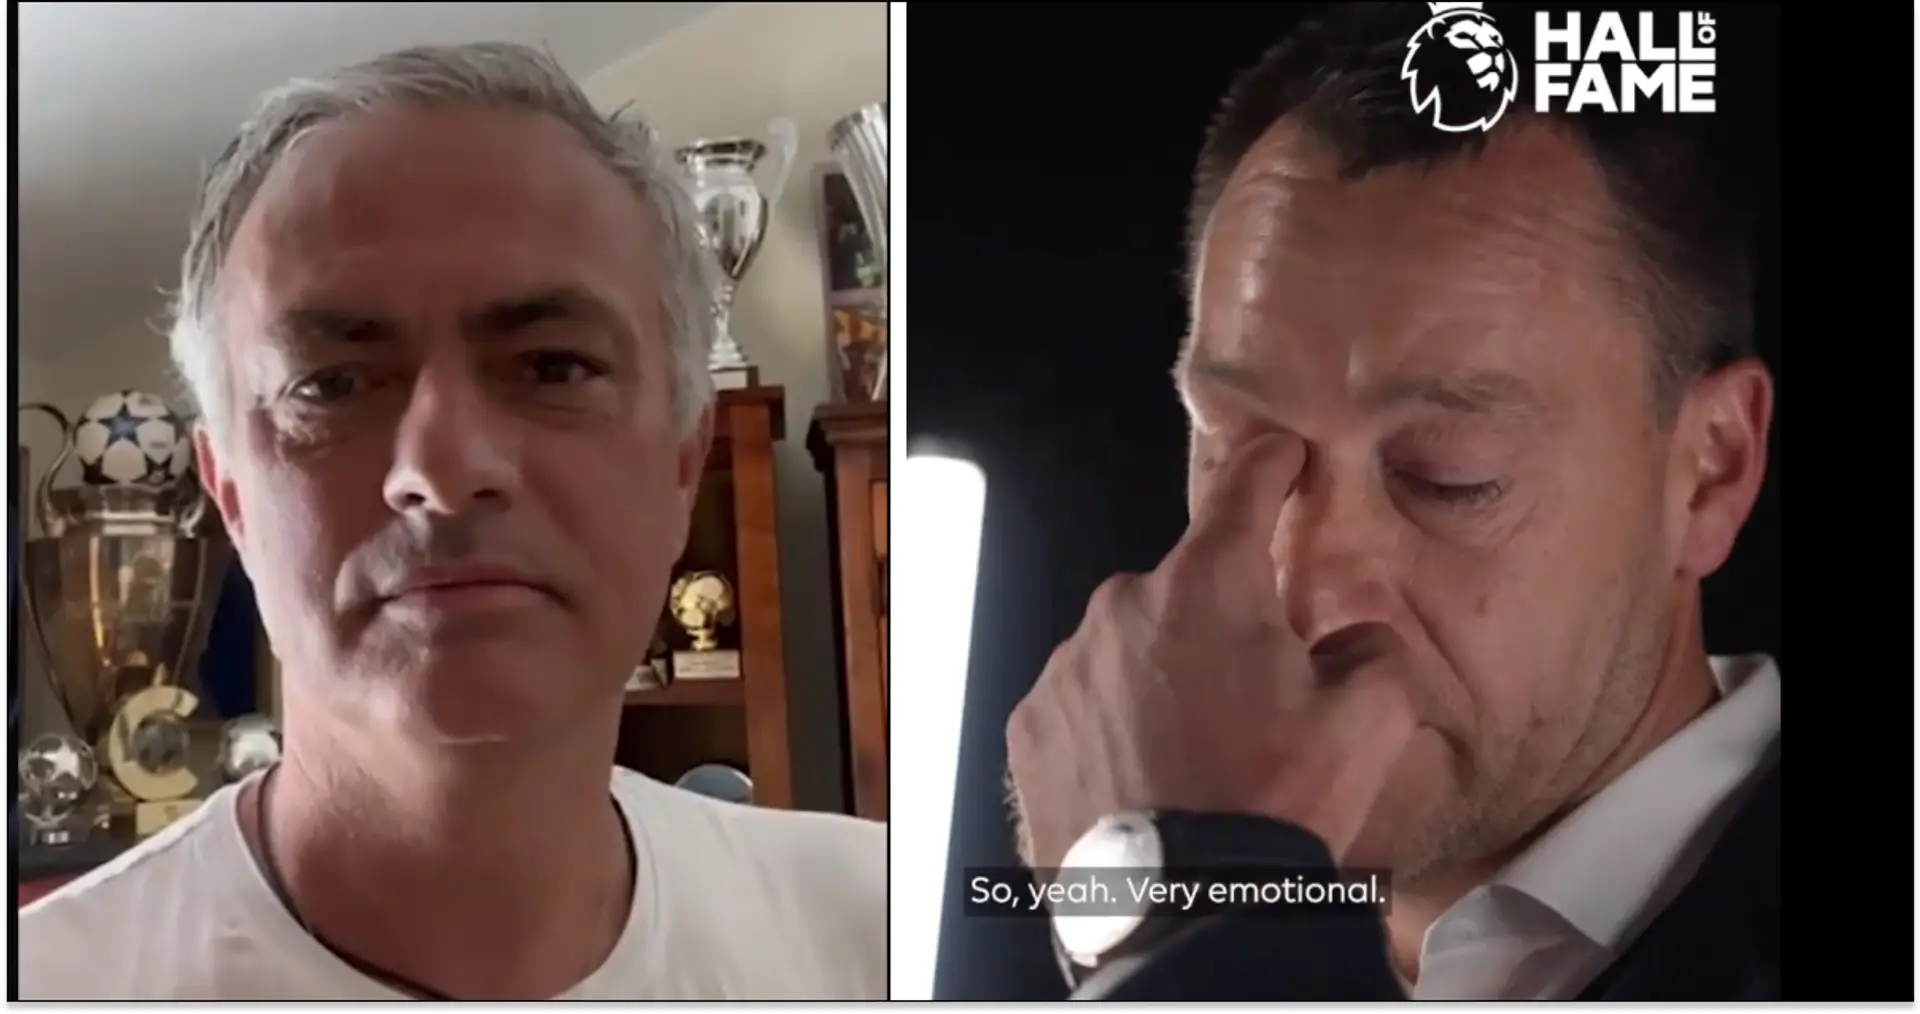 'Sorry': Terry breaks down in tears after Mourinho congratulates him on Hall of Fame induction